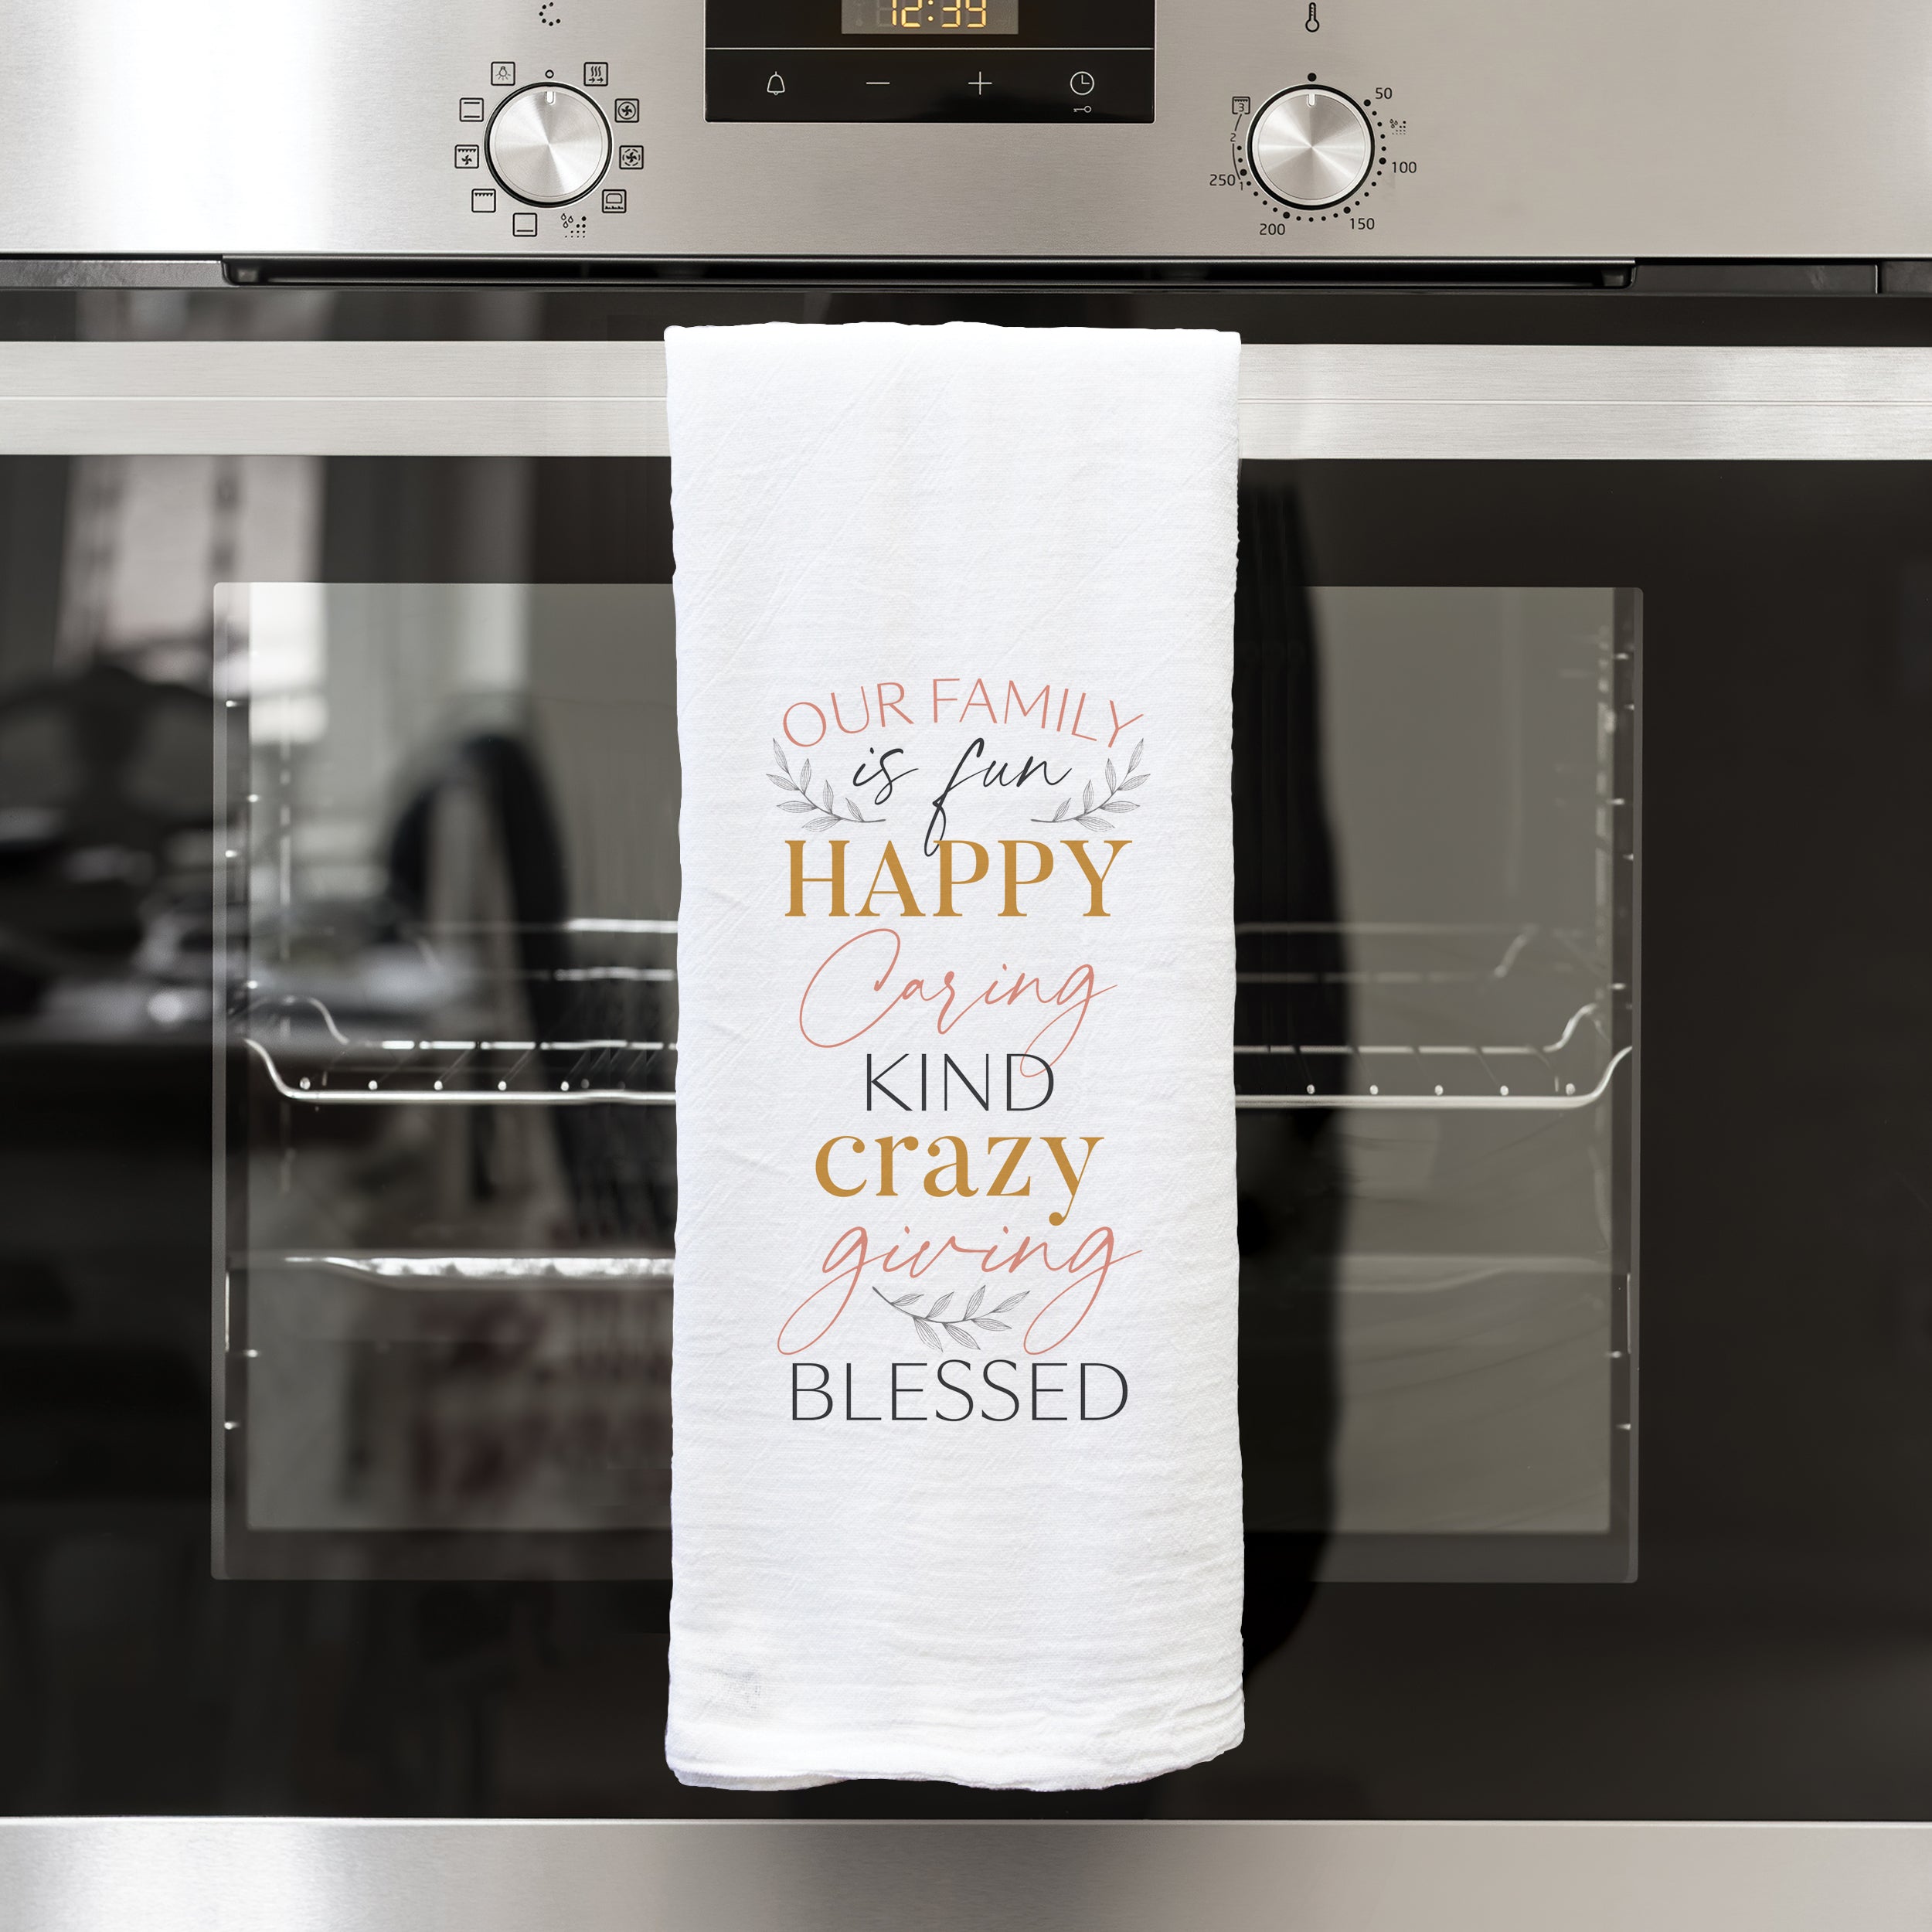 **Our Family Is Fun Happy Caring Kind Crazy Giving Blessed Tea Towel